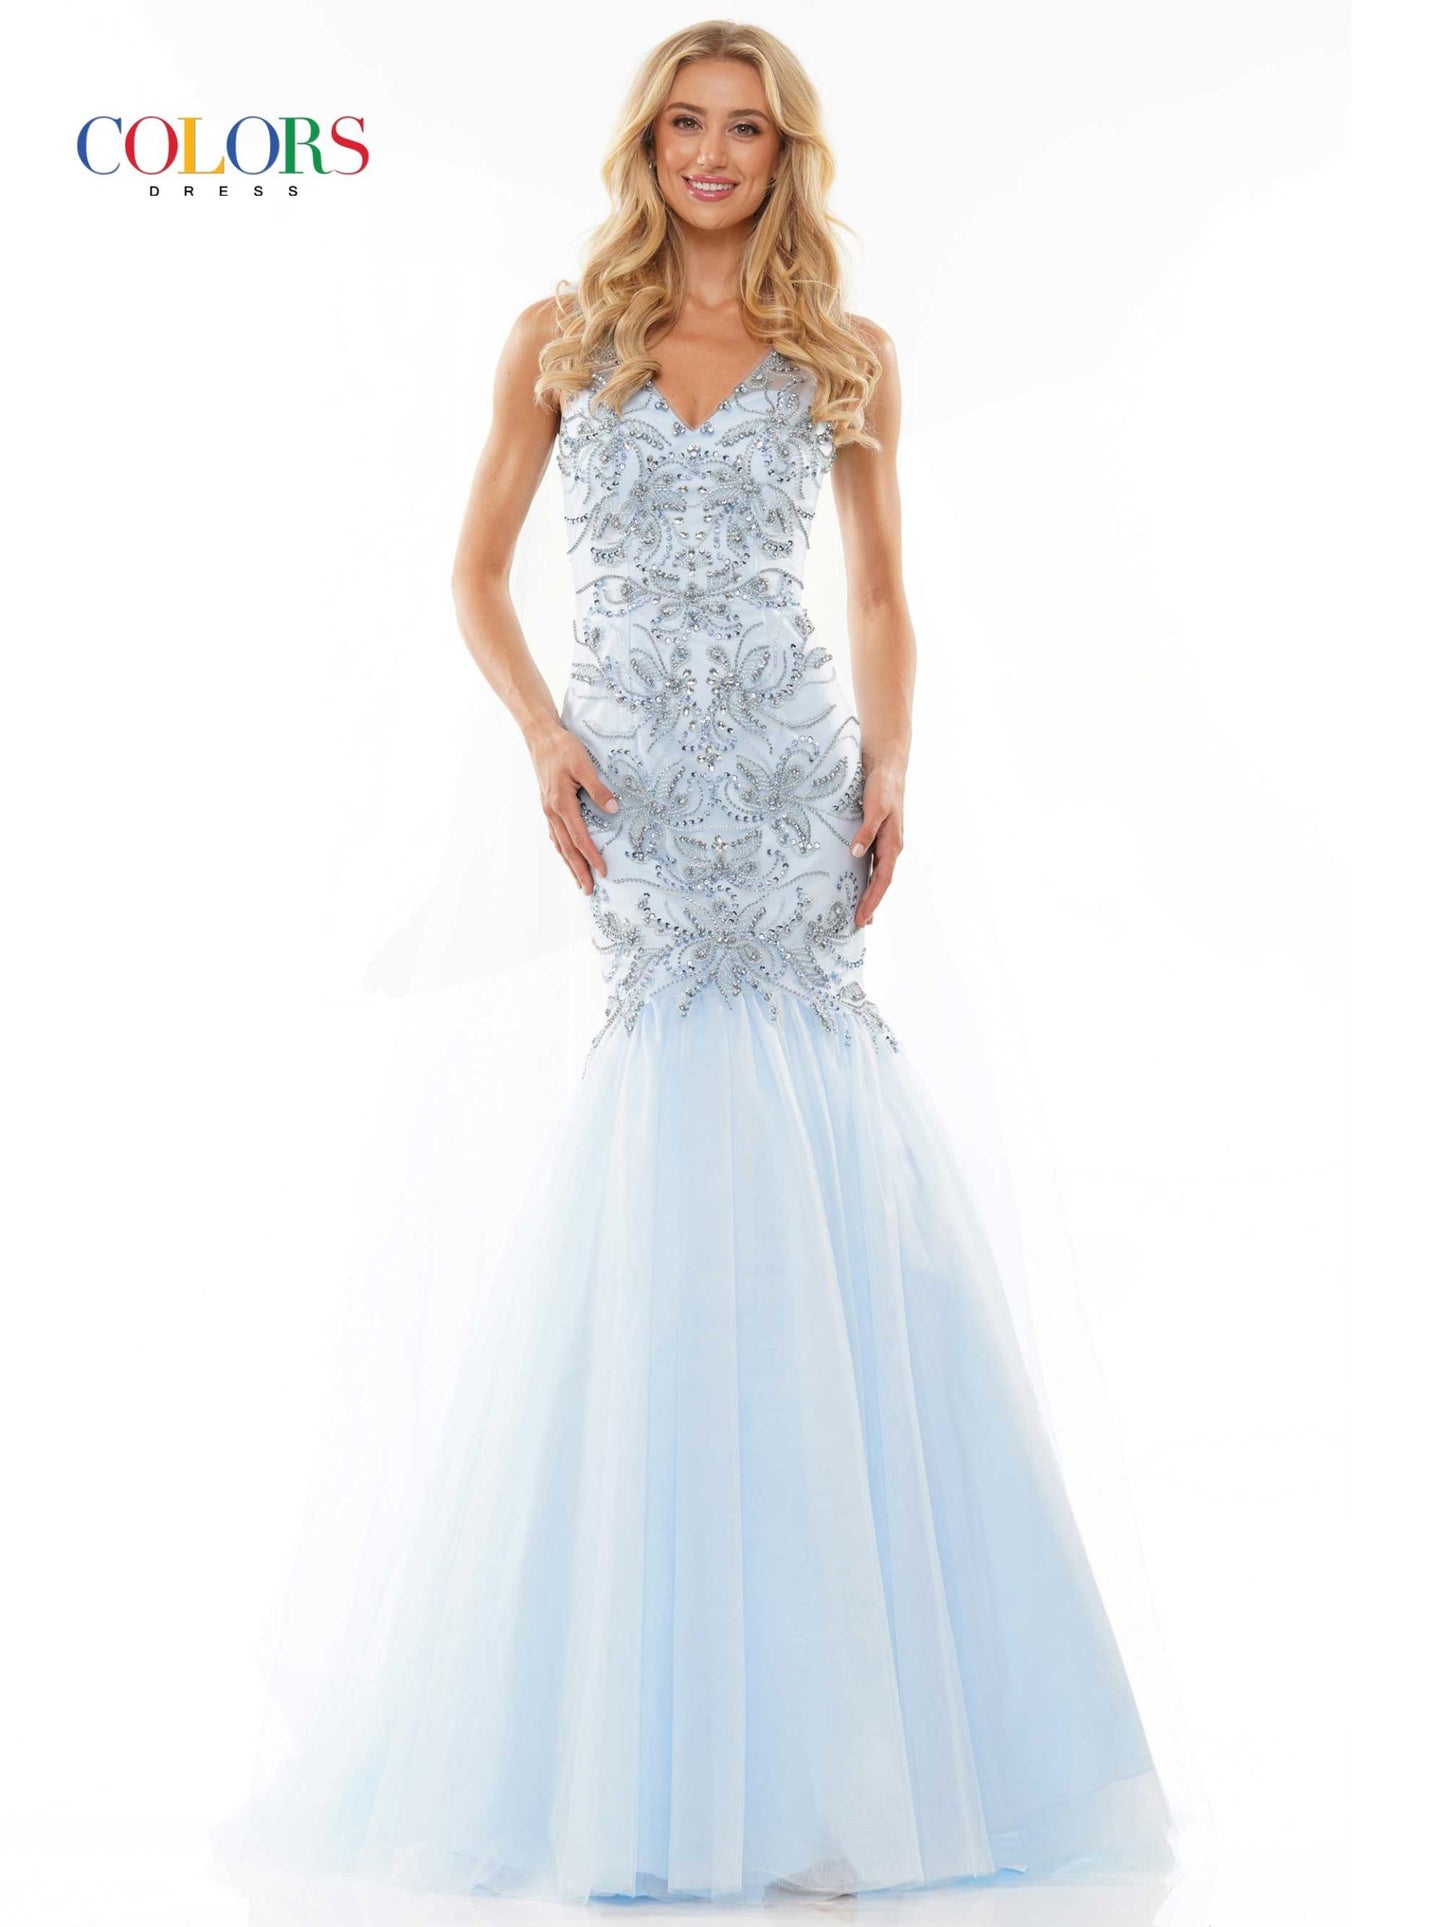 Colors Dress 2993 Mermaid Prom Dress with Capes 47"beaded mesh mermaid dress with V-neck, lace-up on back,  light blue